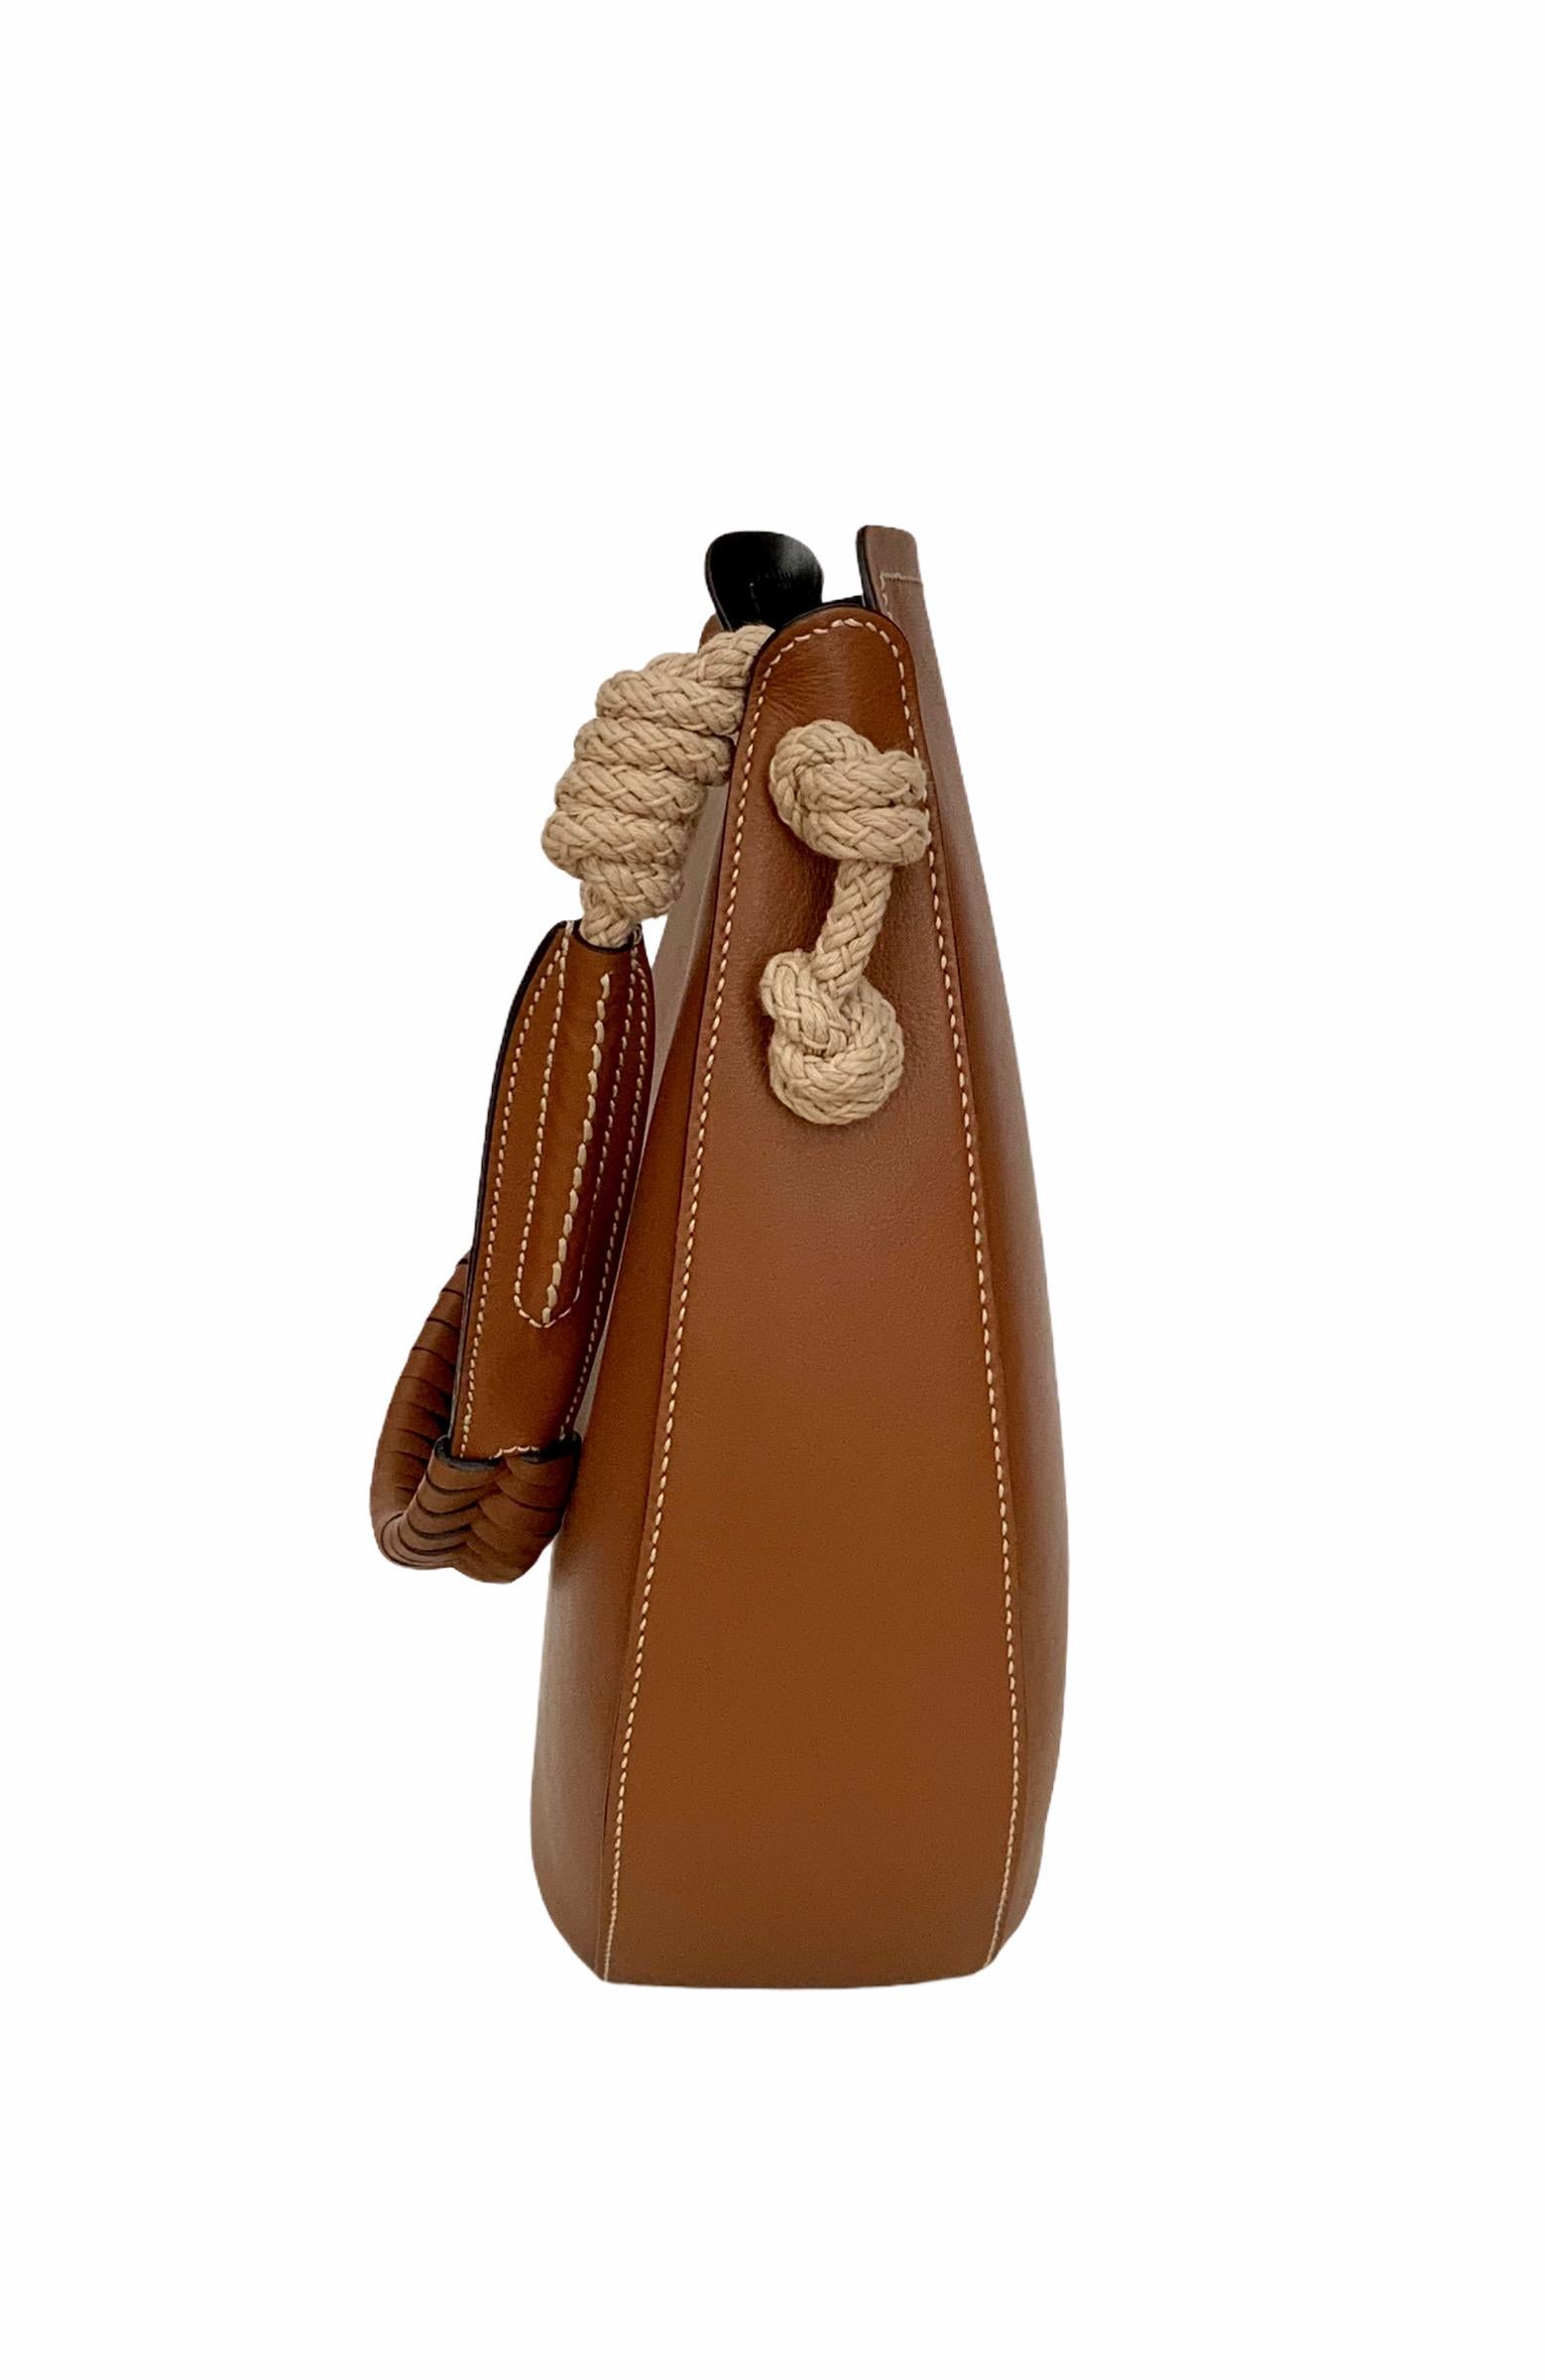 Brown Prada Cognac Leather Bag with Cord Details